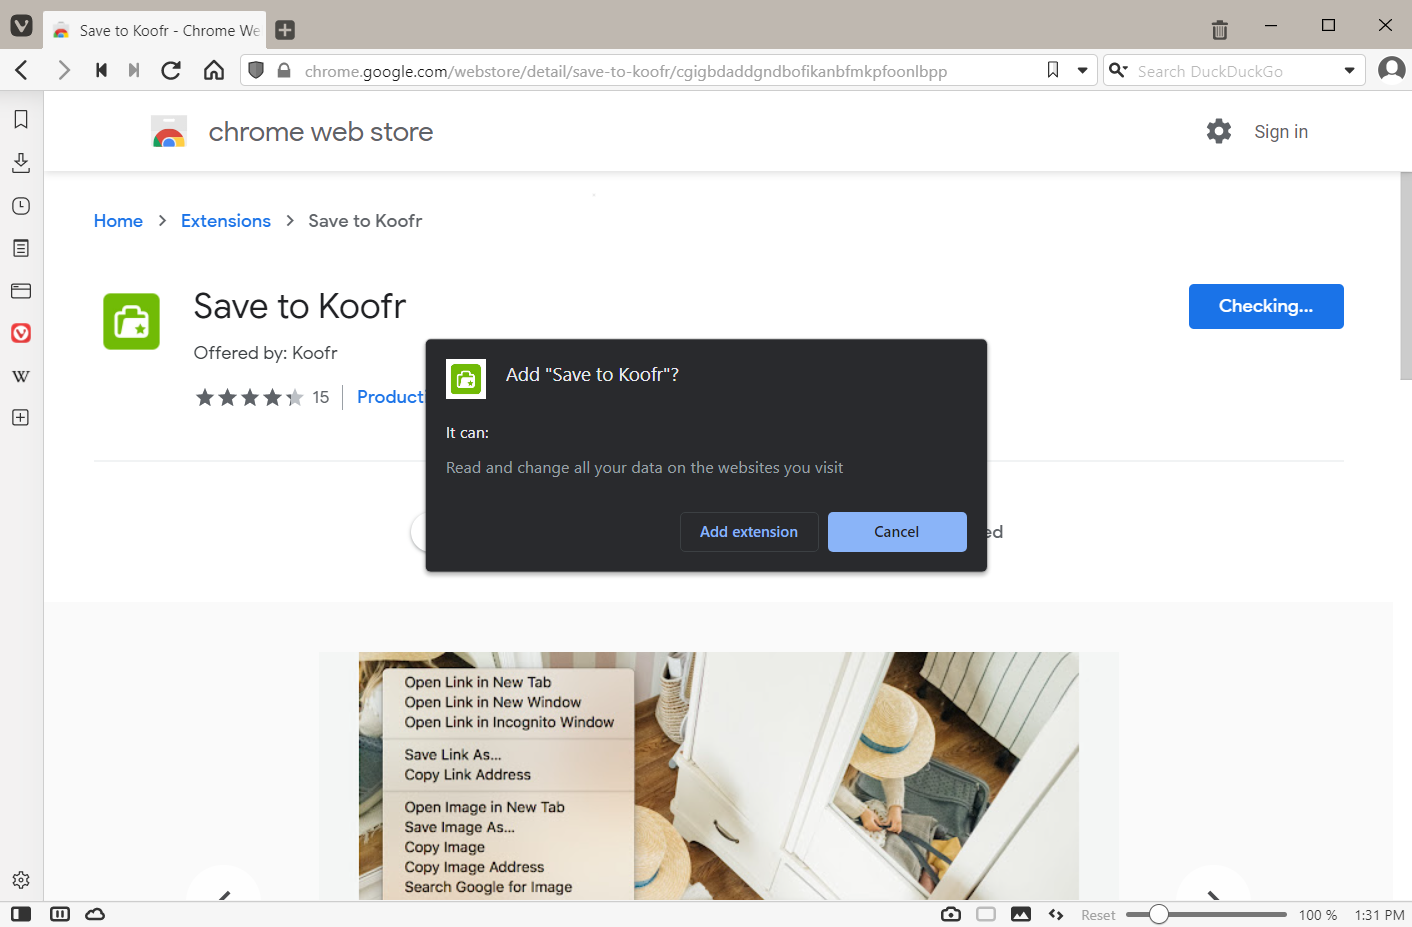 Confirm the installation of the Save to Koofr extension when prompted by the pop-up window.